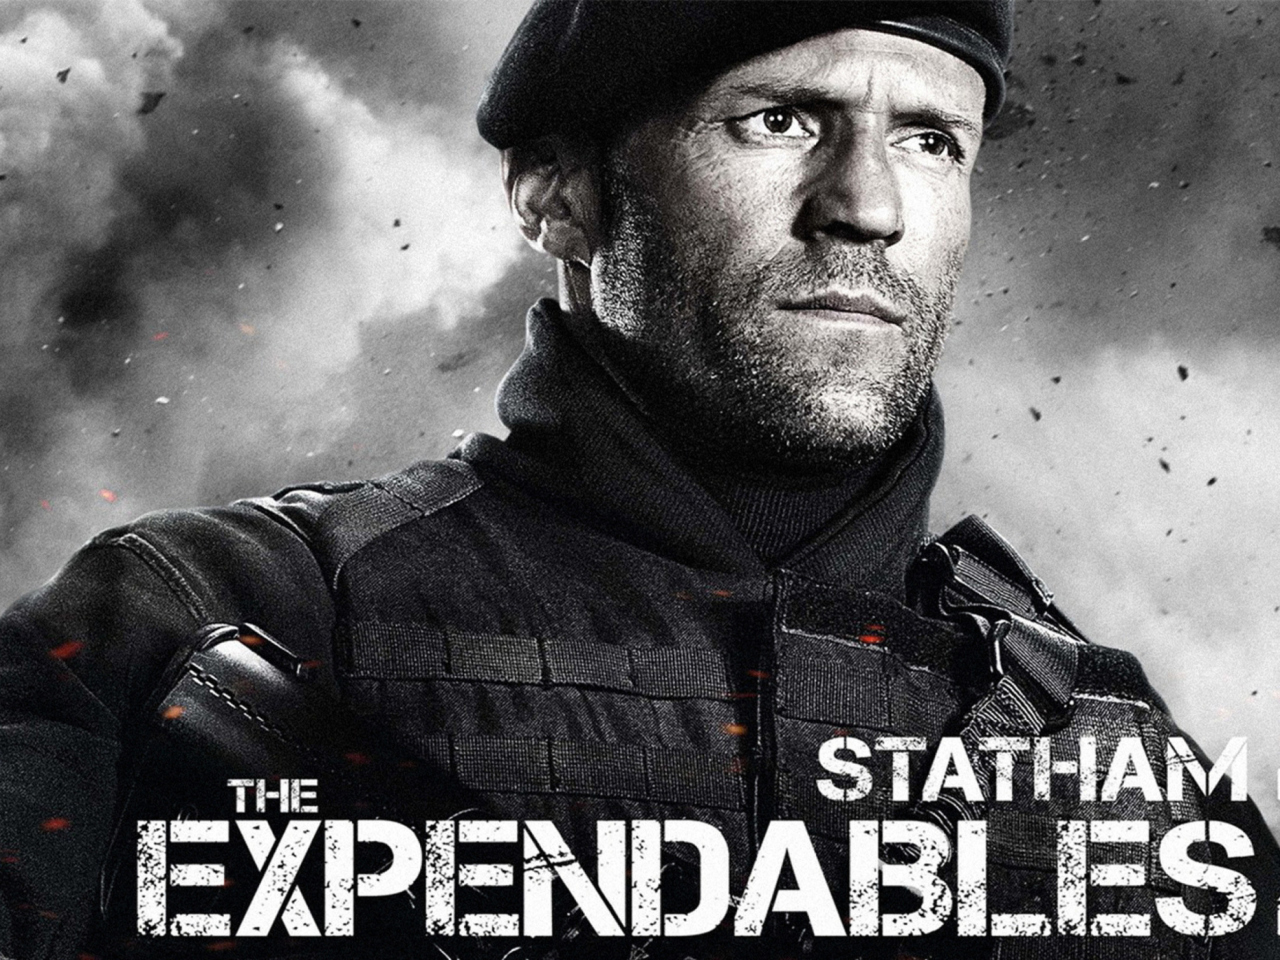 The Expendables 2 - Jason Statham wallpaper 1280x960